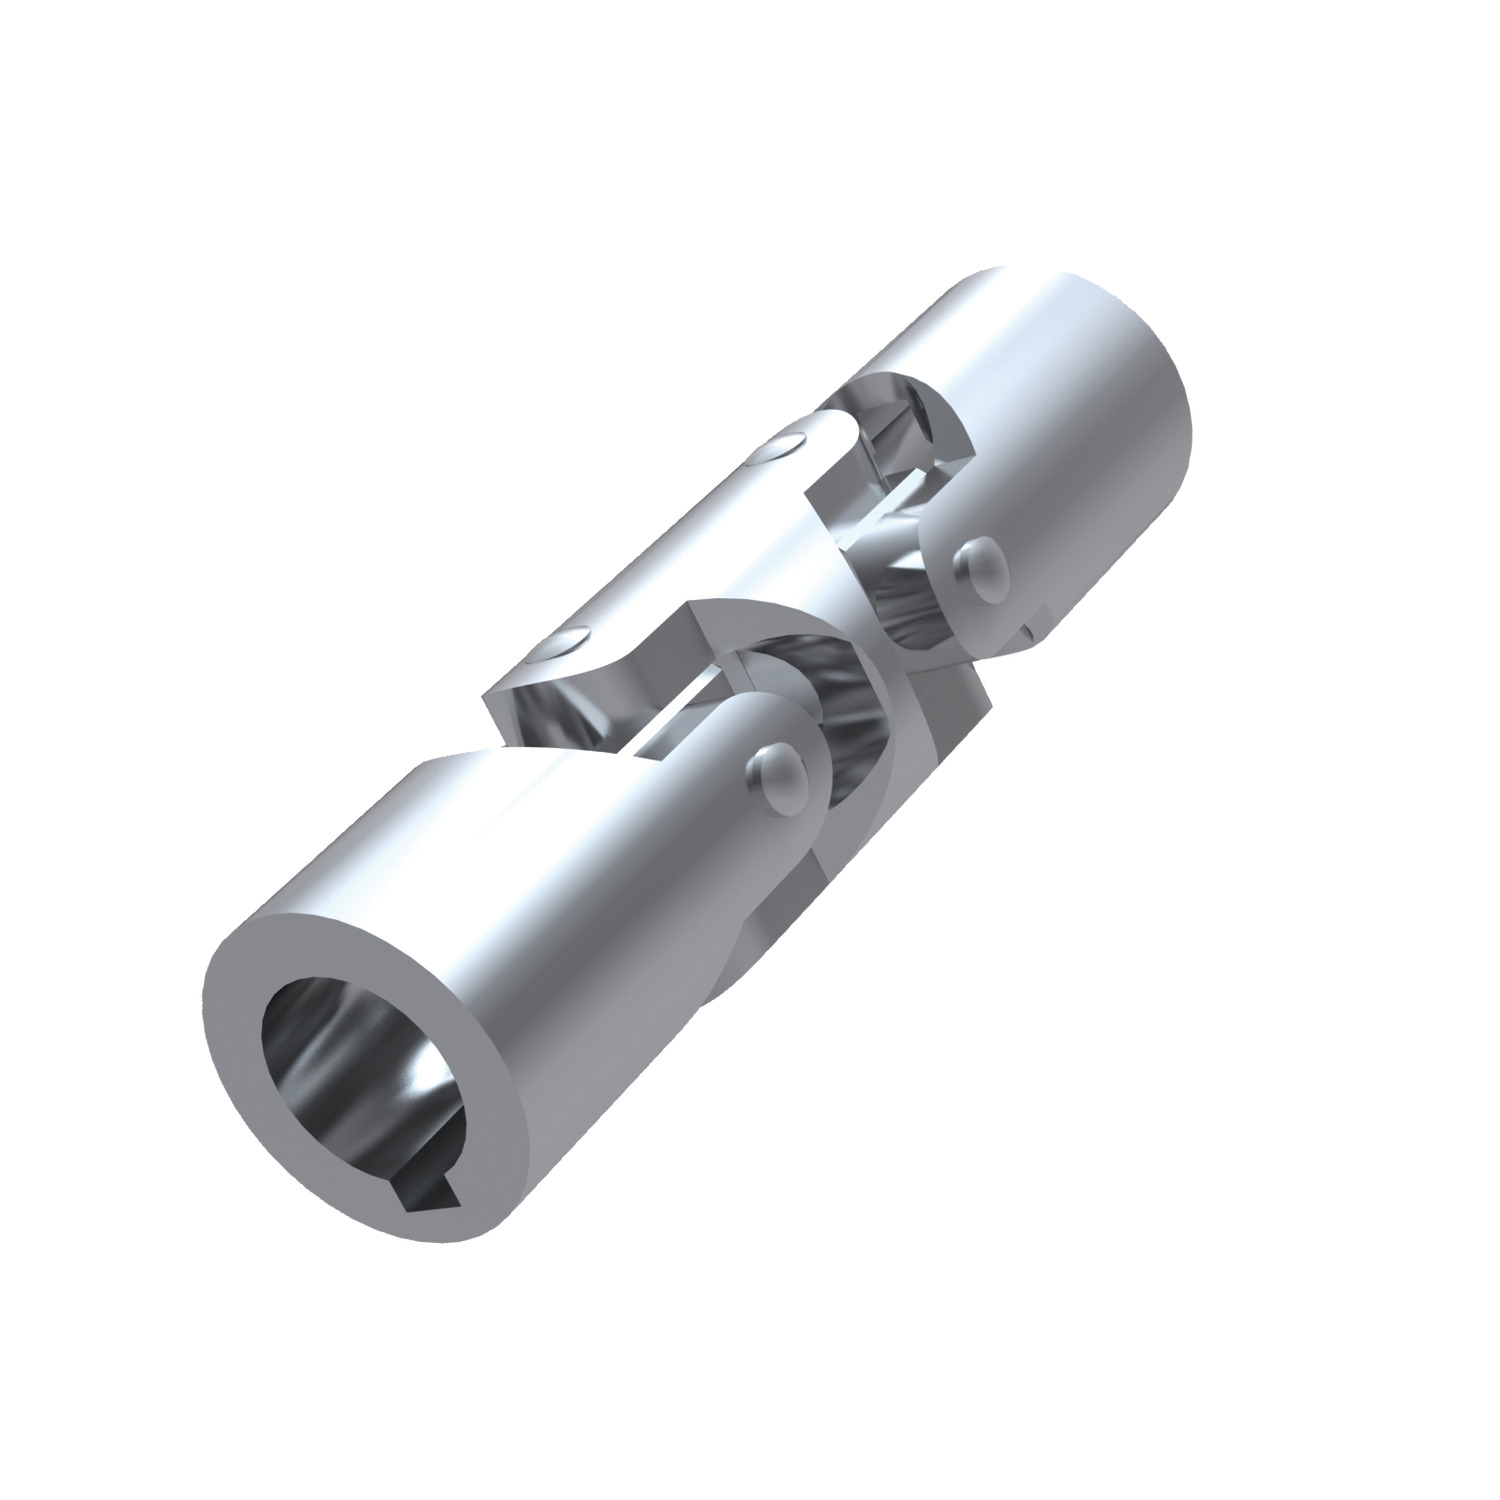 Double Universal Joint Double universal joint typically smaller OD and longer than comparative bore size of R3685.